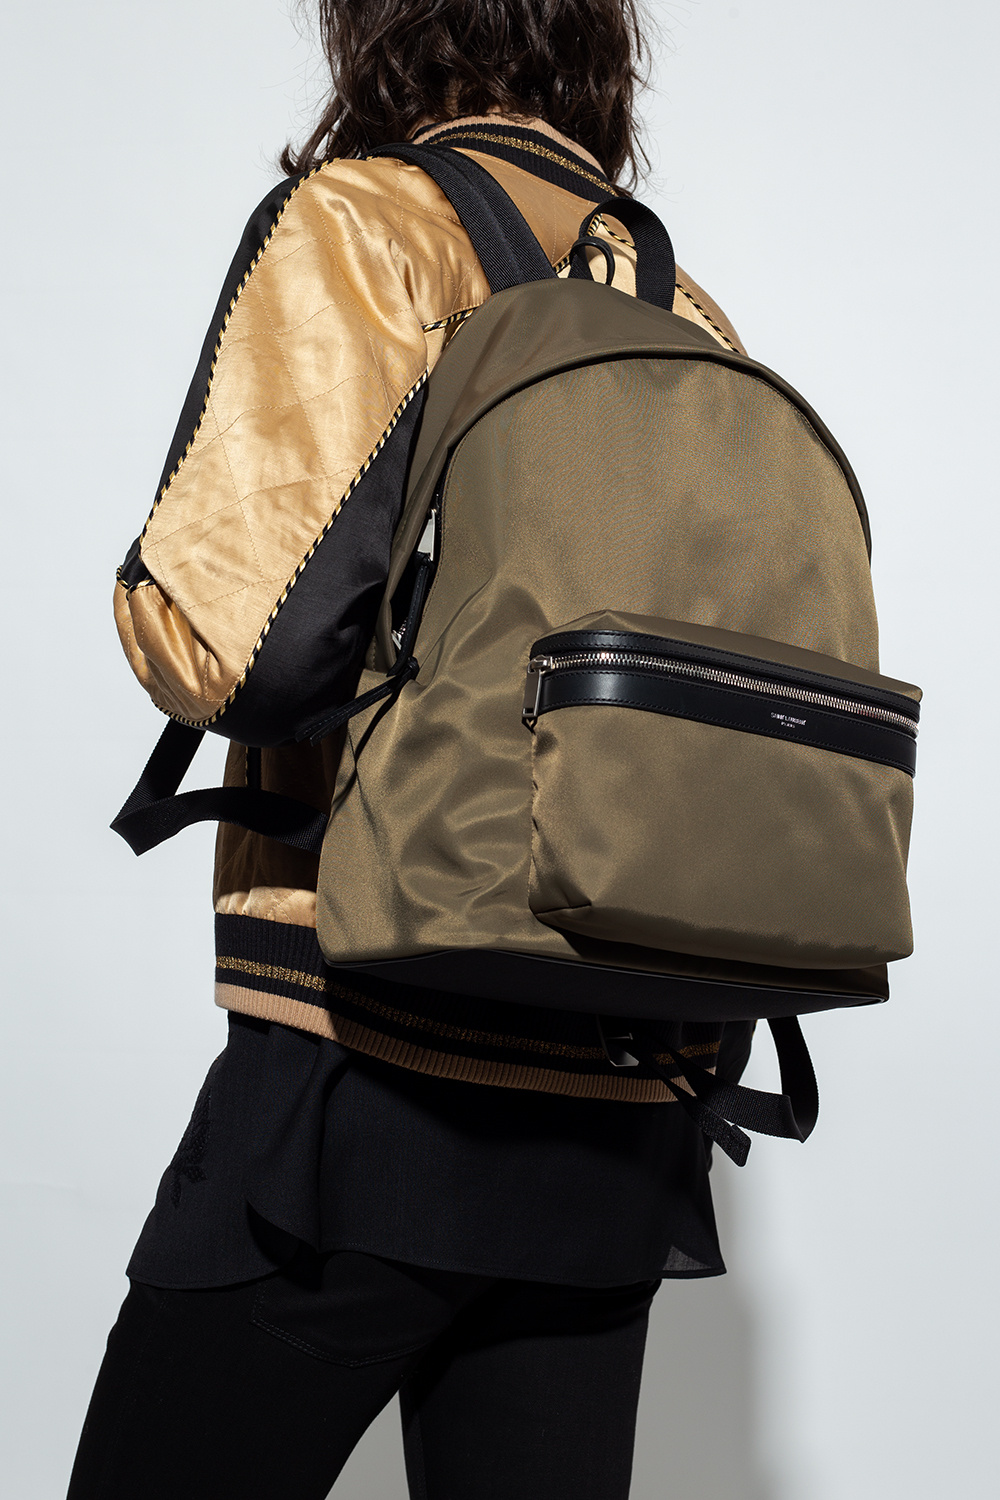 saint laurent backpack in grained leather